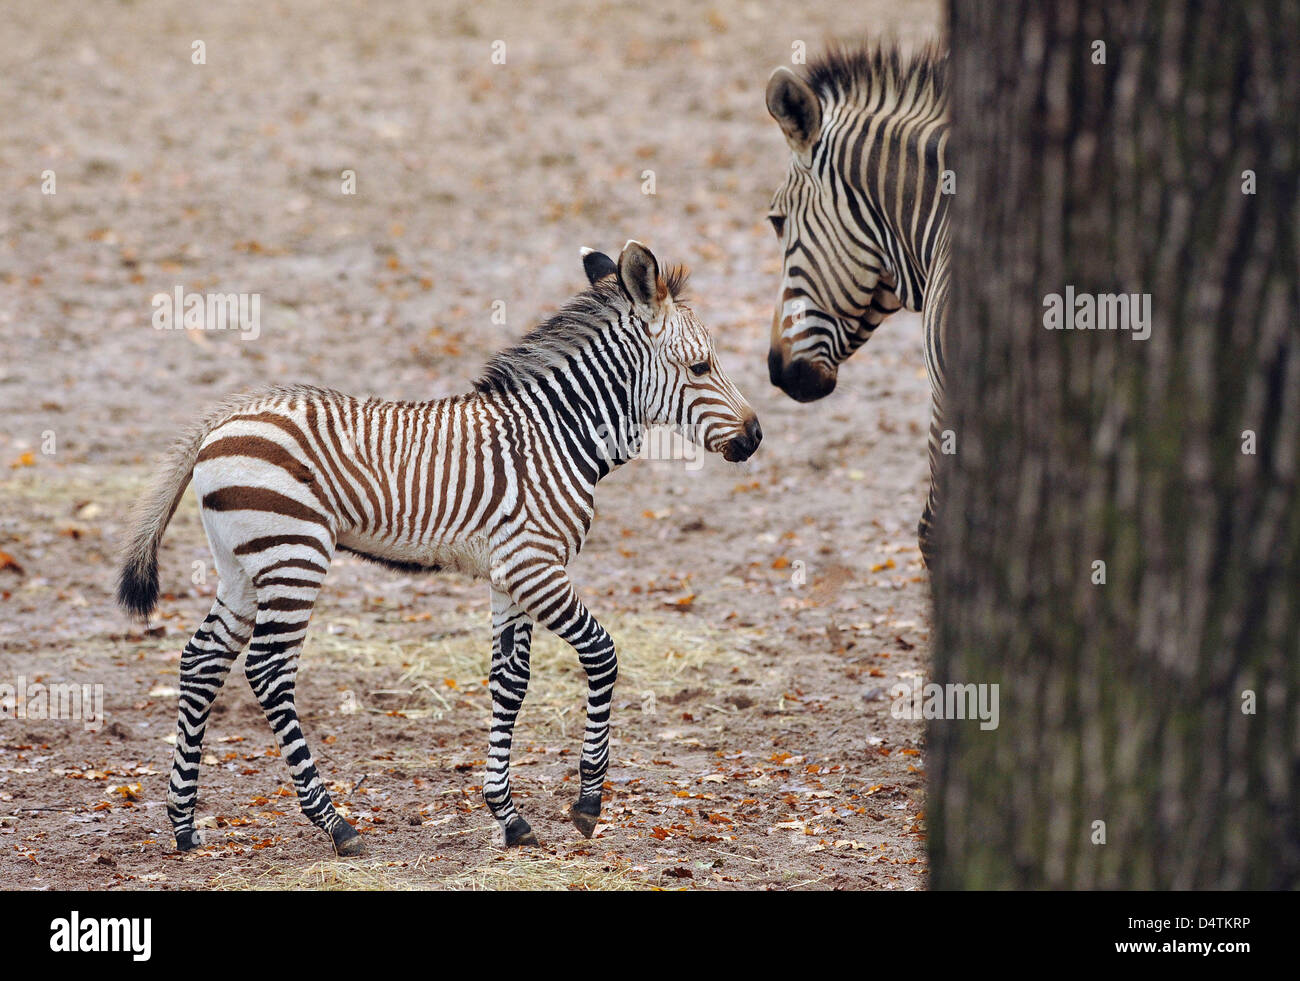 Four-week-old mountain zebra Frauke and her mother Belinda stand in an outdoor enclosure at the zoo in Hanover, Germany, 13 November 2009. After four years of fruitless efforts, the mountain zebra was born at the zoo on 20 October 2009. No more than 85 mountain zebras live in European zoos. Photo: Peter Steffen Stock Photo